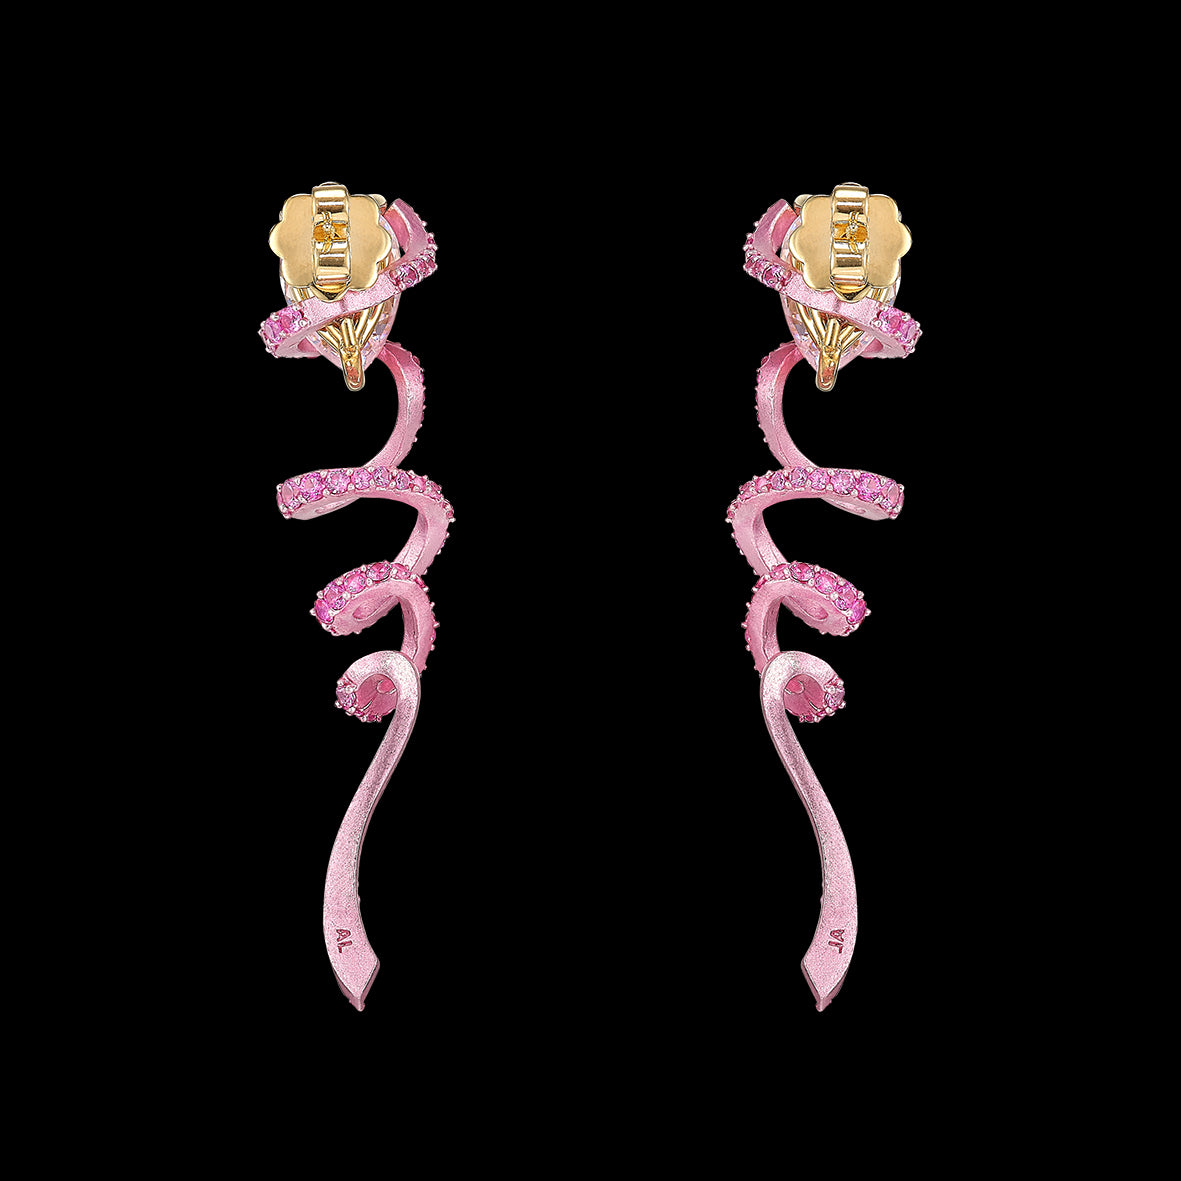 Pink Ribbon Twirl Earrings, Earring, Anabela Chan Joaillerie - Fine jewelry with laboratory grown and created gemstones hand-crafted in the United Kingdom. Anabela Chan Joaillerie is the first fine jewellery brand in the world to champion laboratory-grown and created gemstones with high jewellery design, artisanal craftsmanship and a focus on ethical and sustainable innovations.